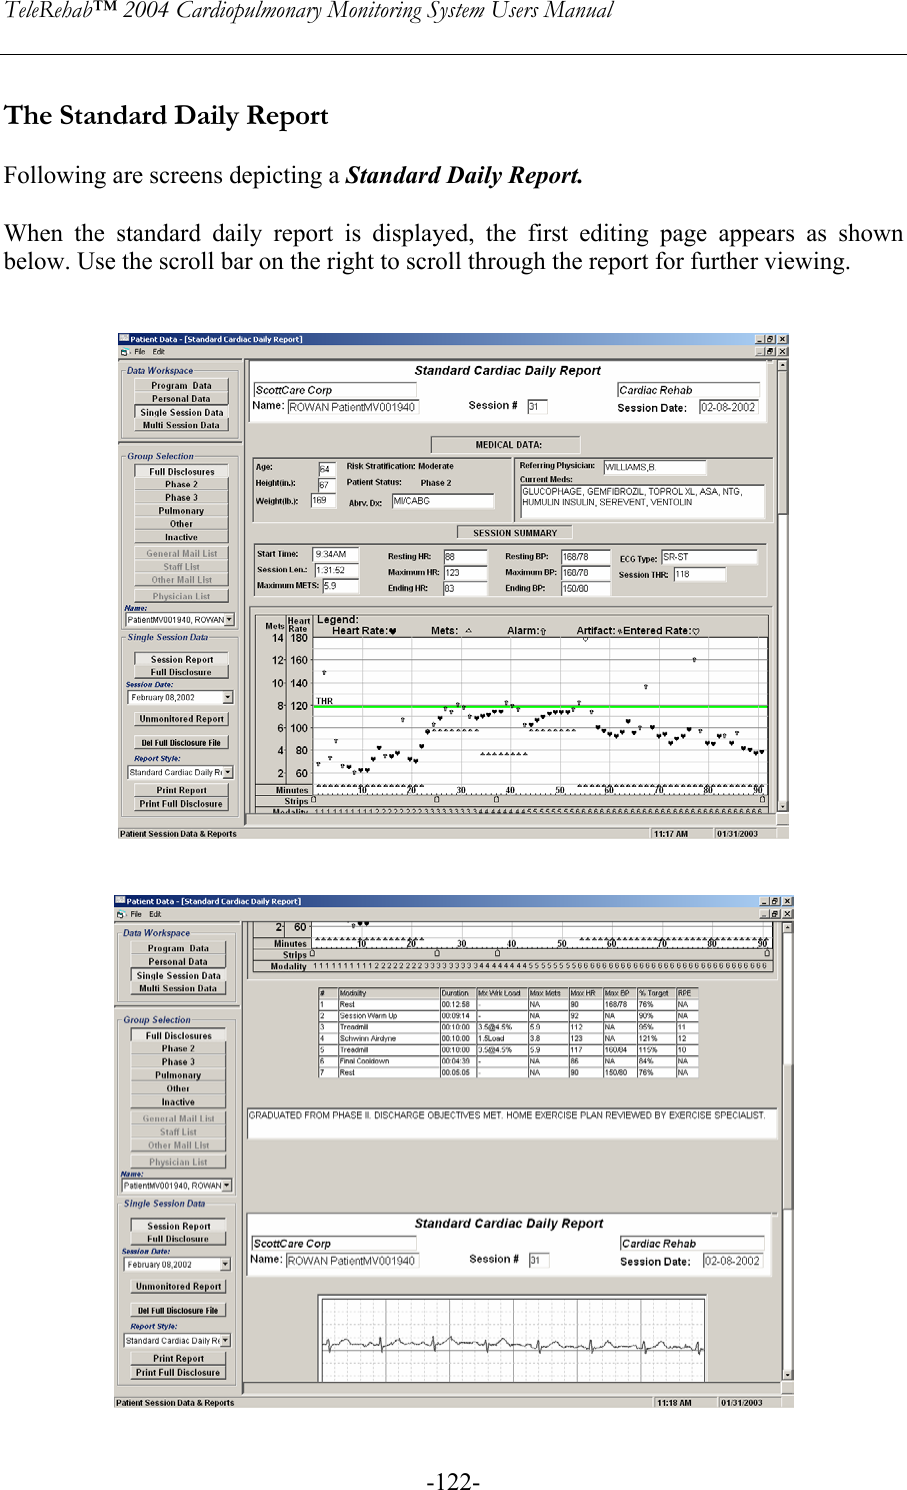 TeleRehab™ 2004 Cardiopulmonary Monitoring System Users Manual    -122- The Standard Daily Report  Following are screens depicting a Standard Daily Report.  When the standard daily report is displayed, the first editing page appears as shown below. Use the scroll bar on the right to scroll through the report for further viewing.        